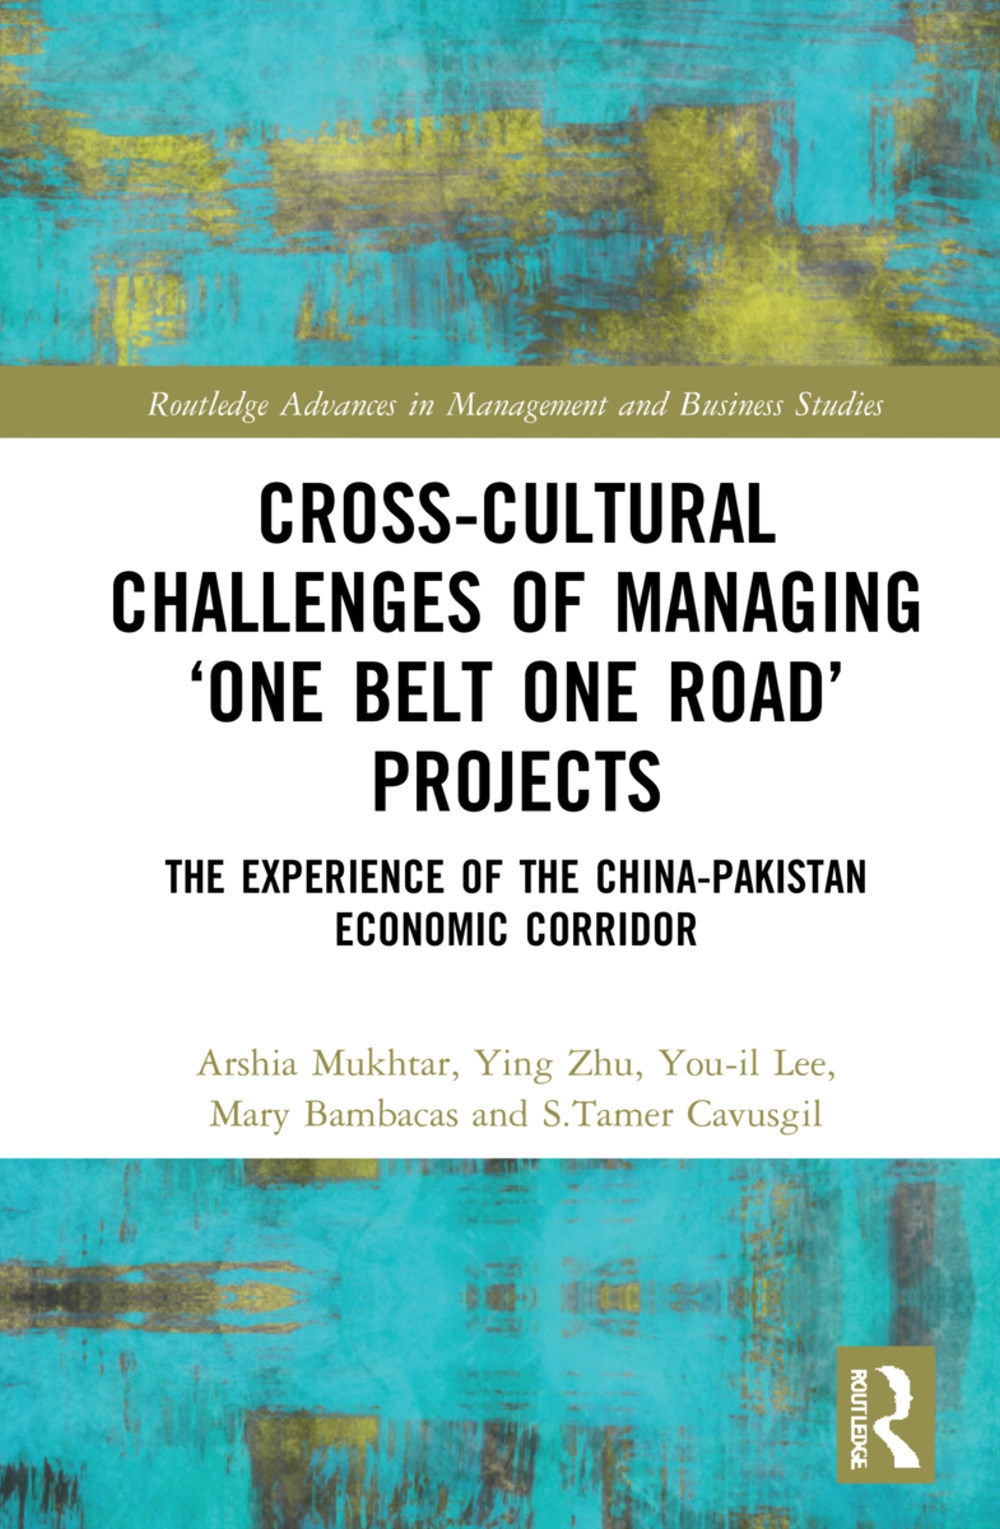 Cross-Cultural Challenges of Managing ’One Belt One Road’ Projects: The Experience of the China-Pakistan Economic Corridor